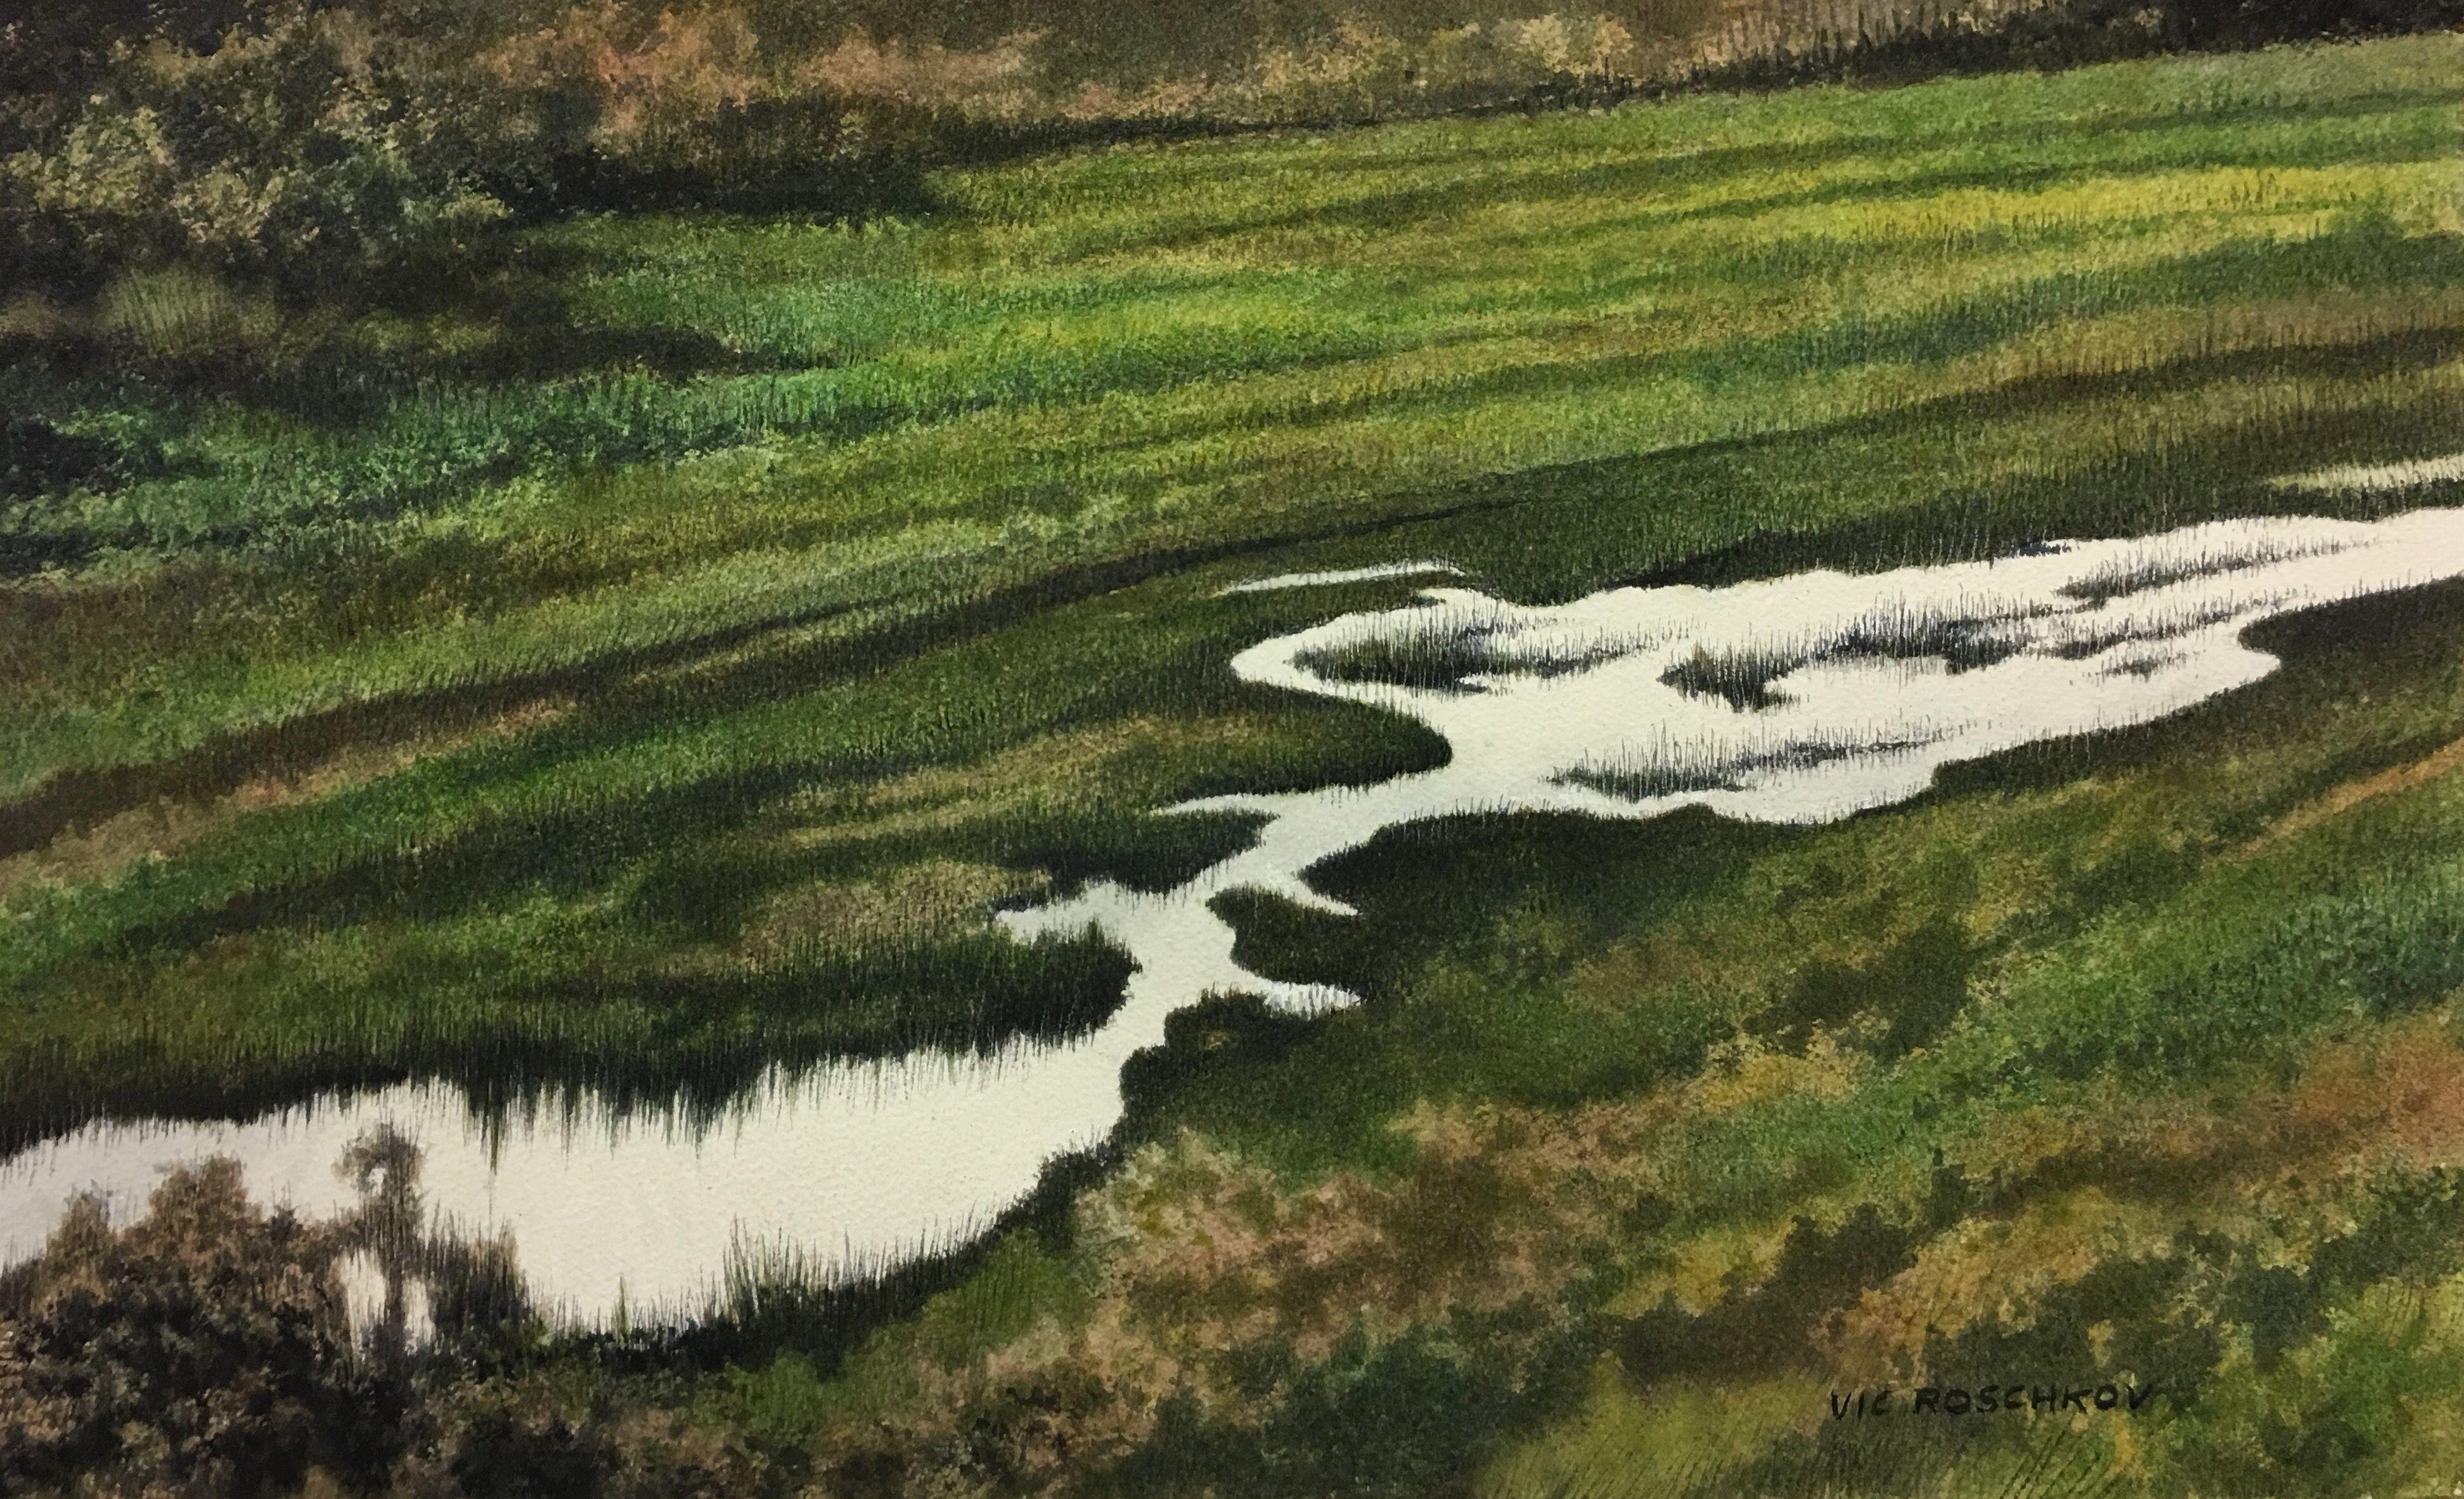 Overflowing Creek, Painting, Watercolor on Watercolor Paper - Art by Victor Roschkov